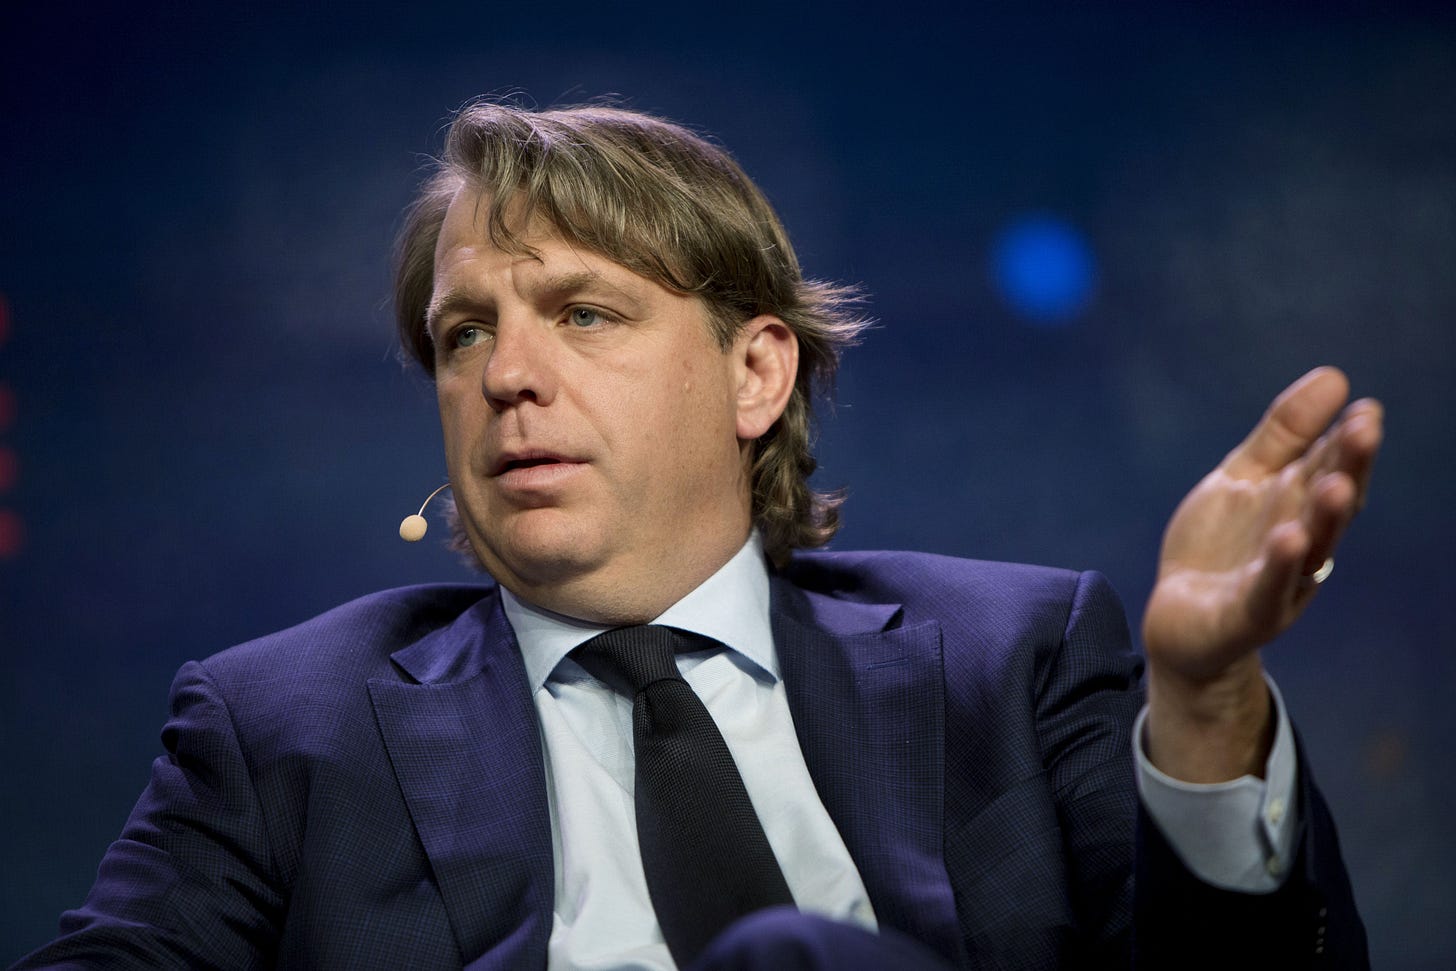  Todd Boehly made a formal offer to buy Chelsea